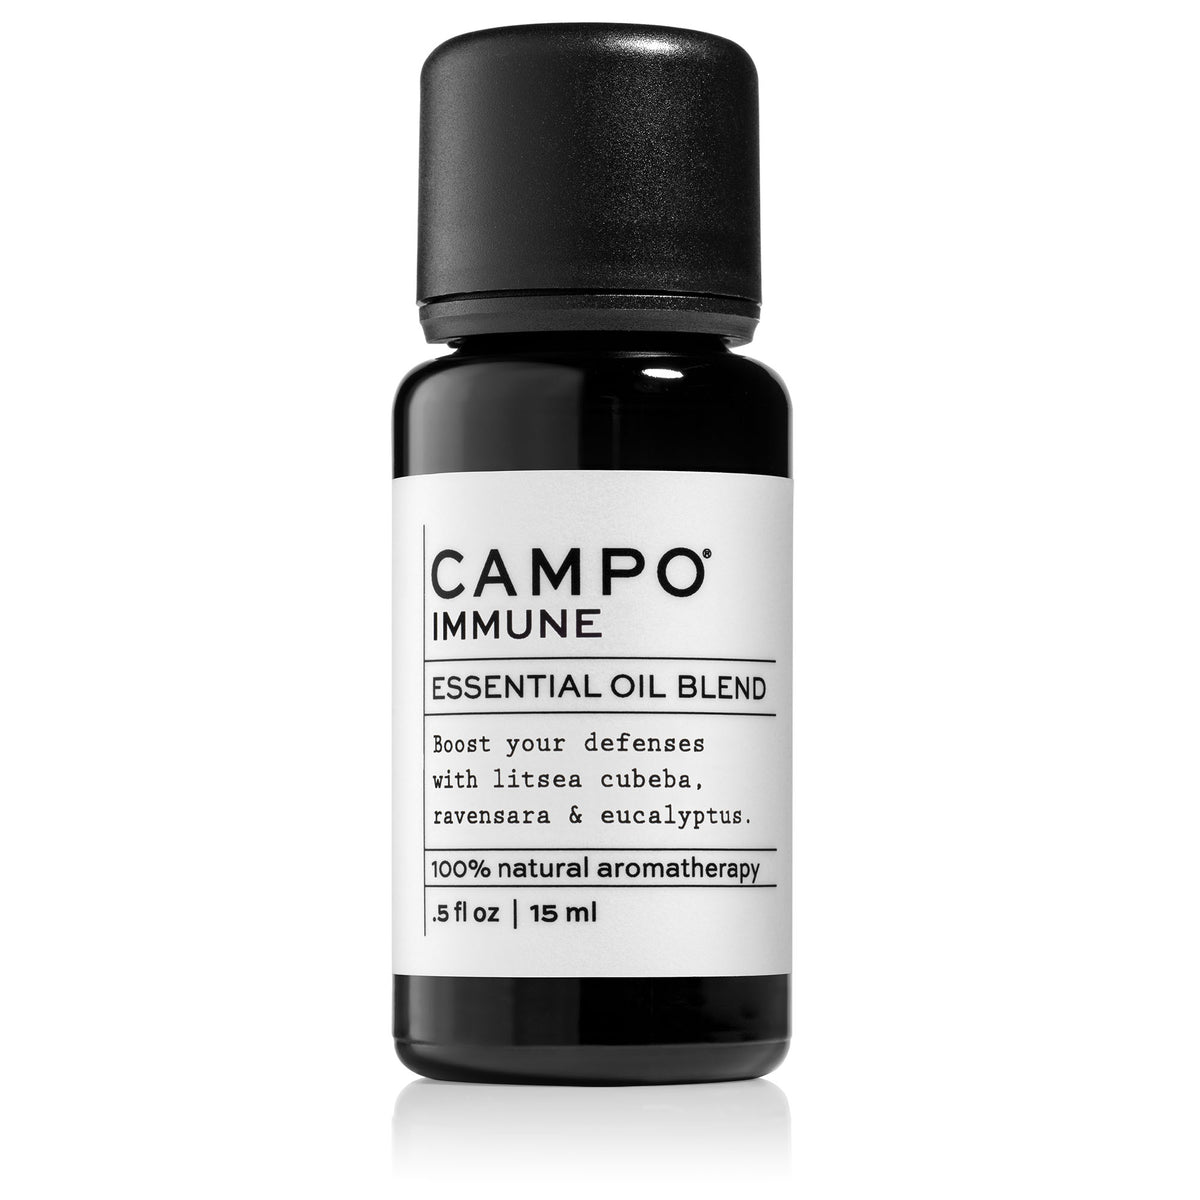 Campo Beauty IMMUNE Blend 15 ml Essential Oil. Boost your defenses with this 100% natural essential oil blend of litsea cubeba, ravensara &amp; eucalyptus.